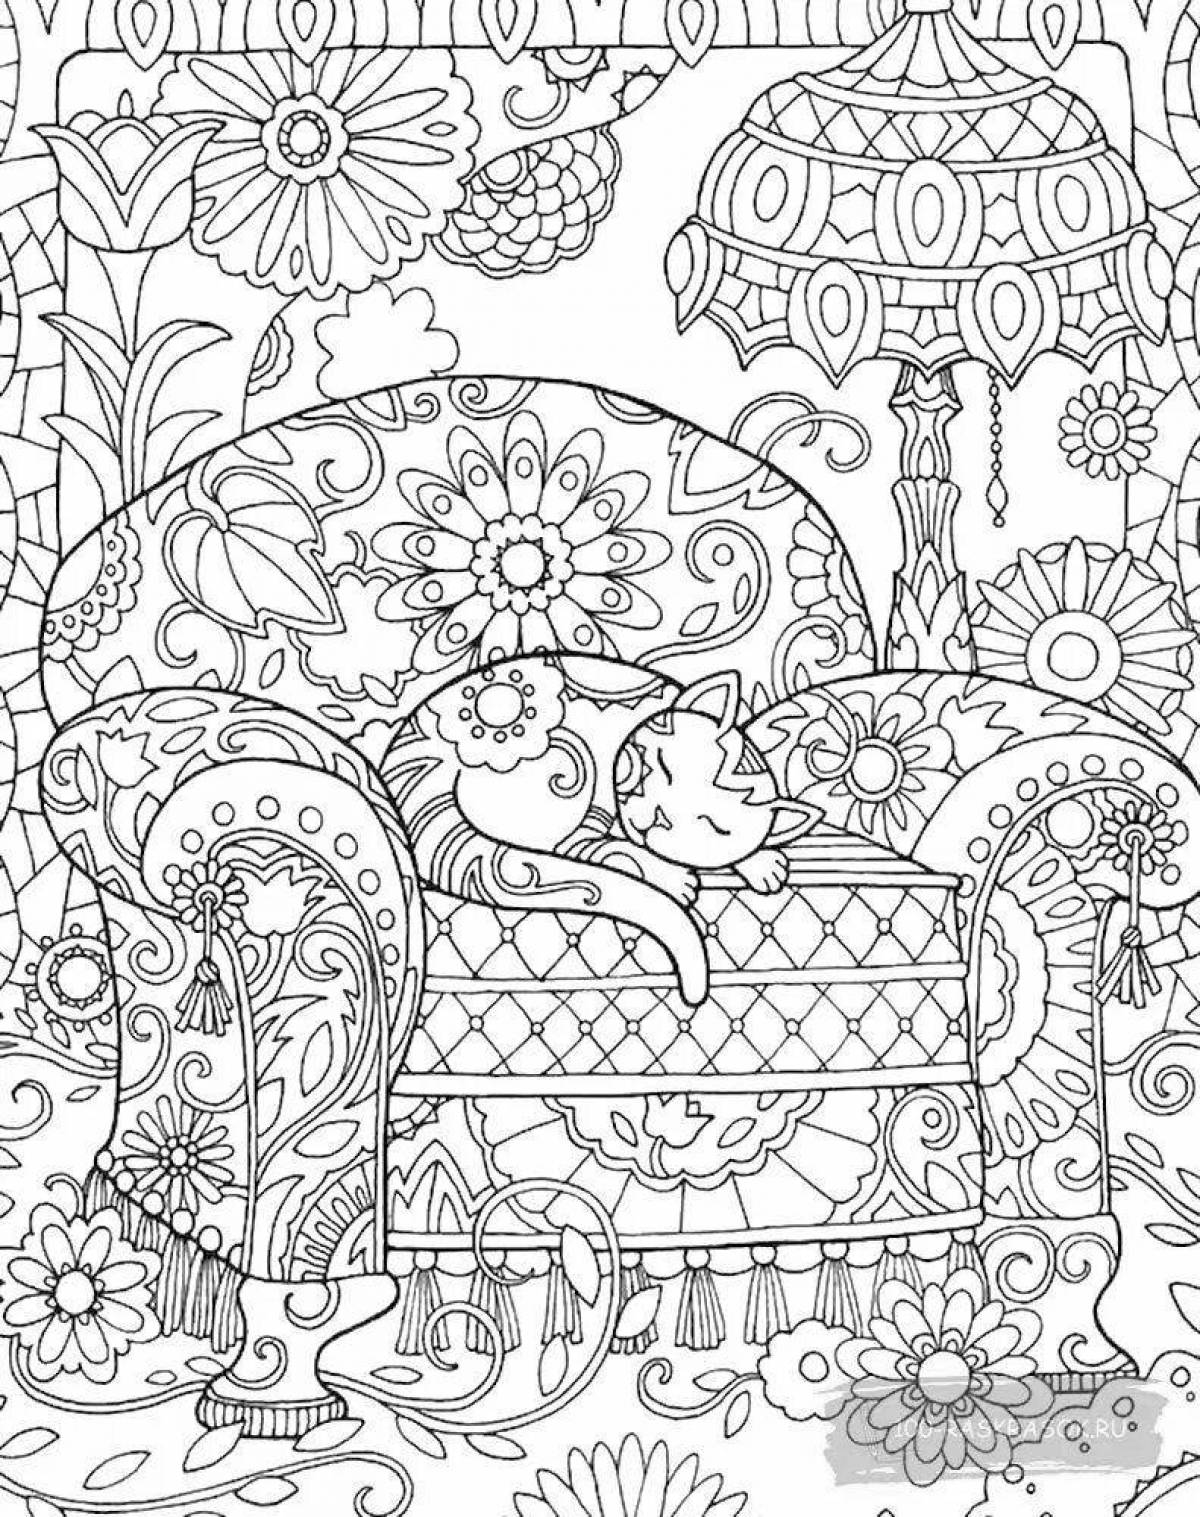 Stimulating anti-stress coloring book for children